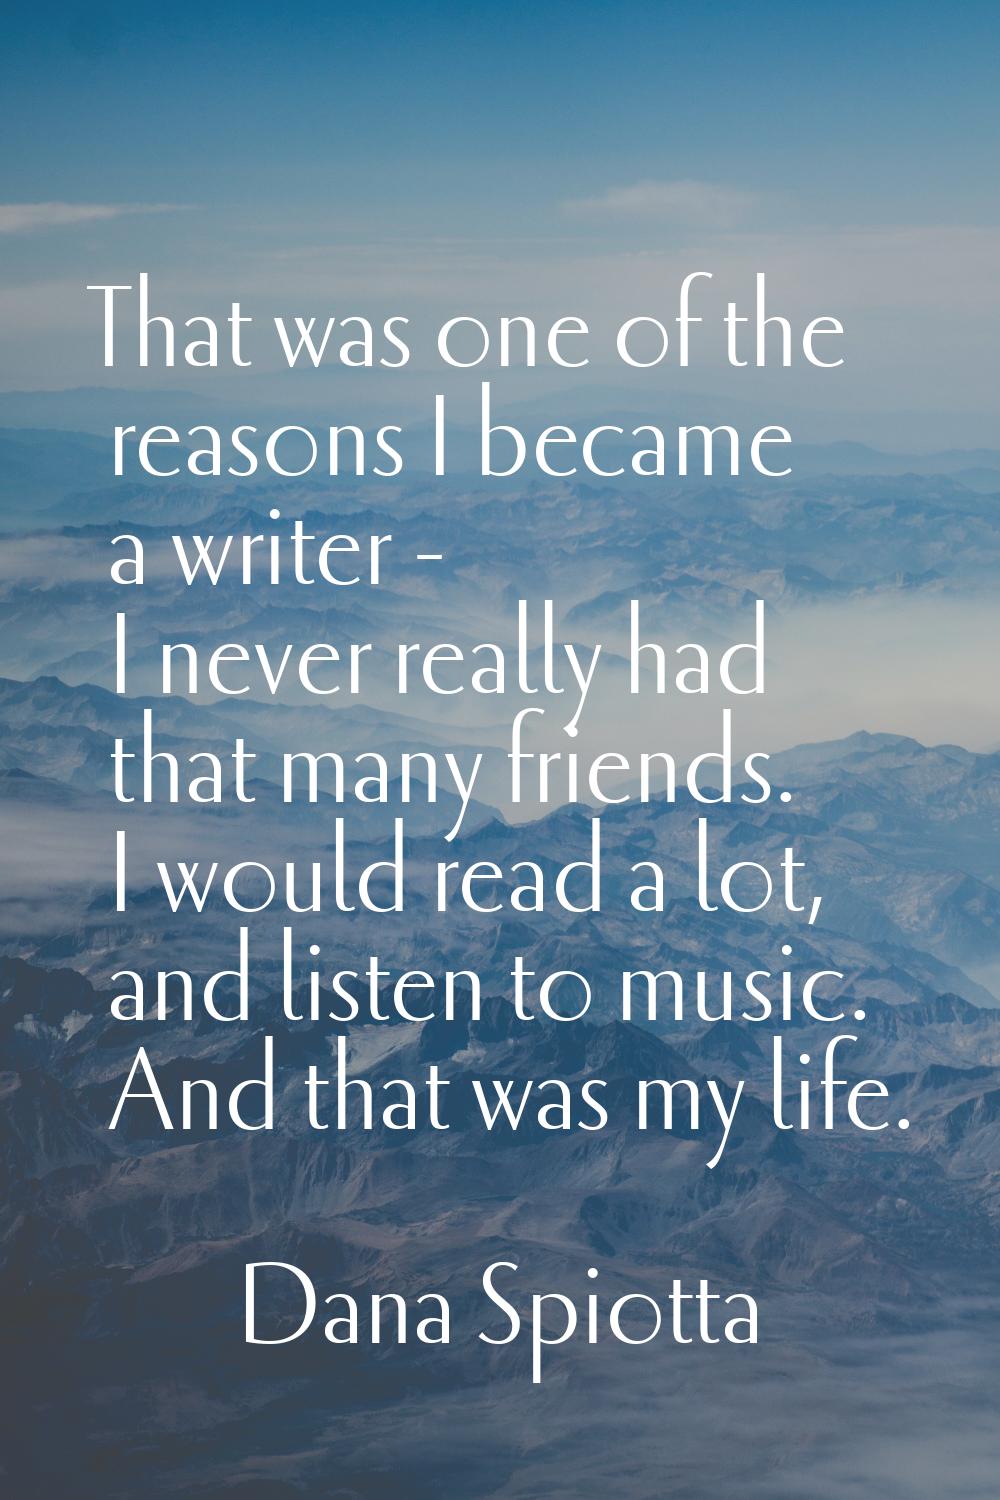 That was one of the reasons I became a writer - I never really had that many friends. I would read 